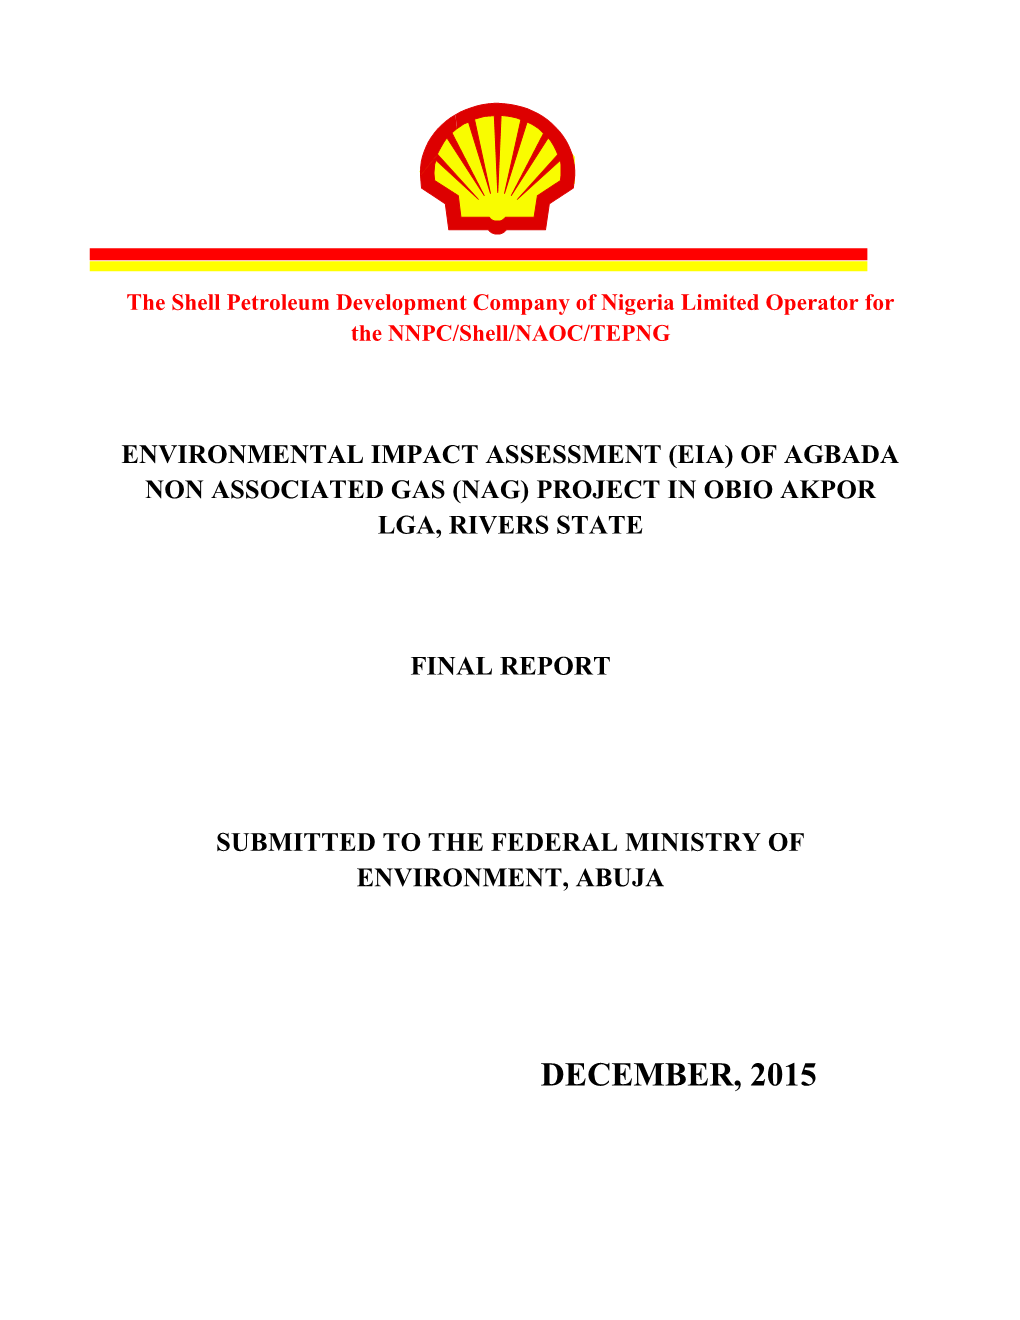 DECEMBER, 2015 Environmental Impact Assessment of Agbada Non Associated Gas (NAG) Project